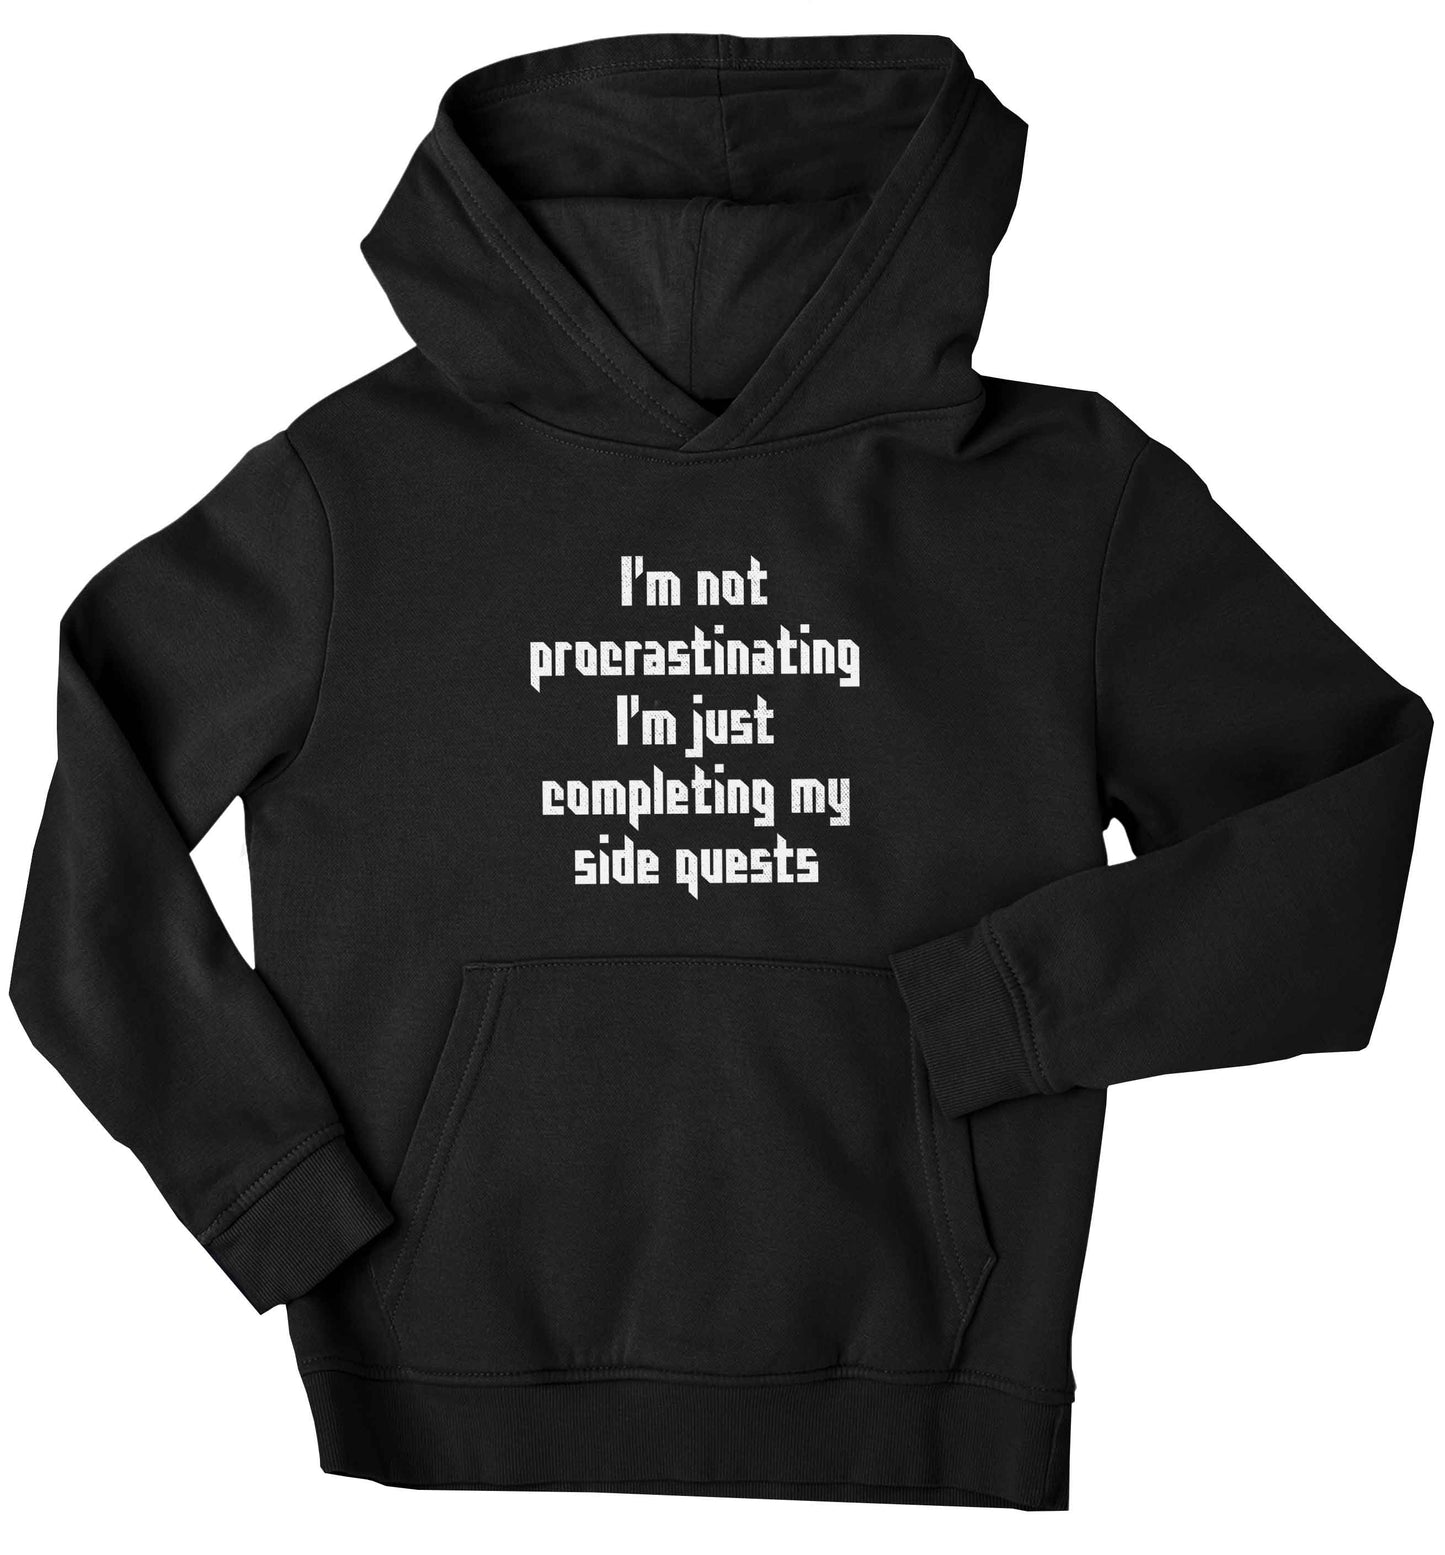 I'm not procrastinating I'm just completing my side quests children's black hoodie 12-13 Years